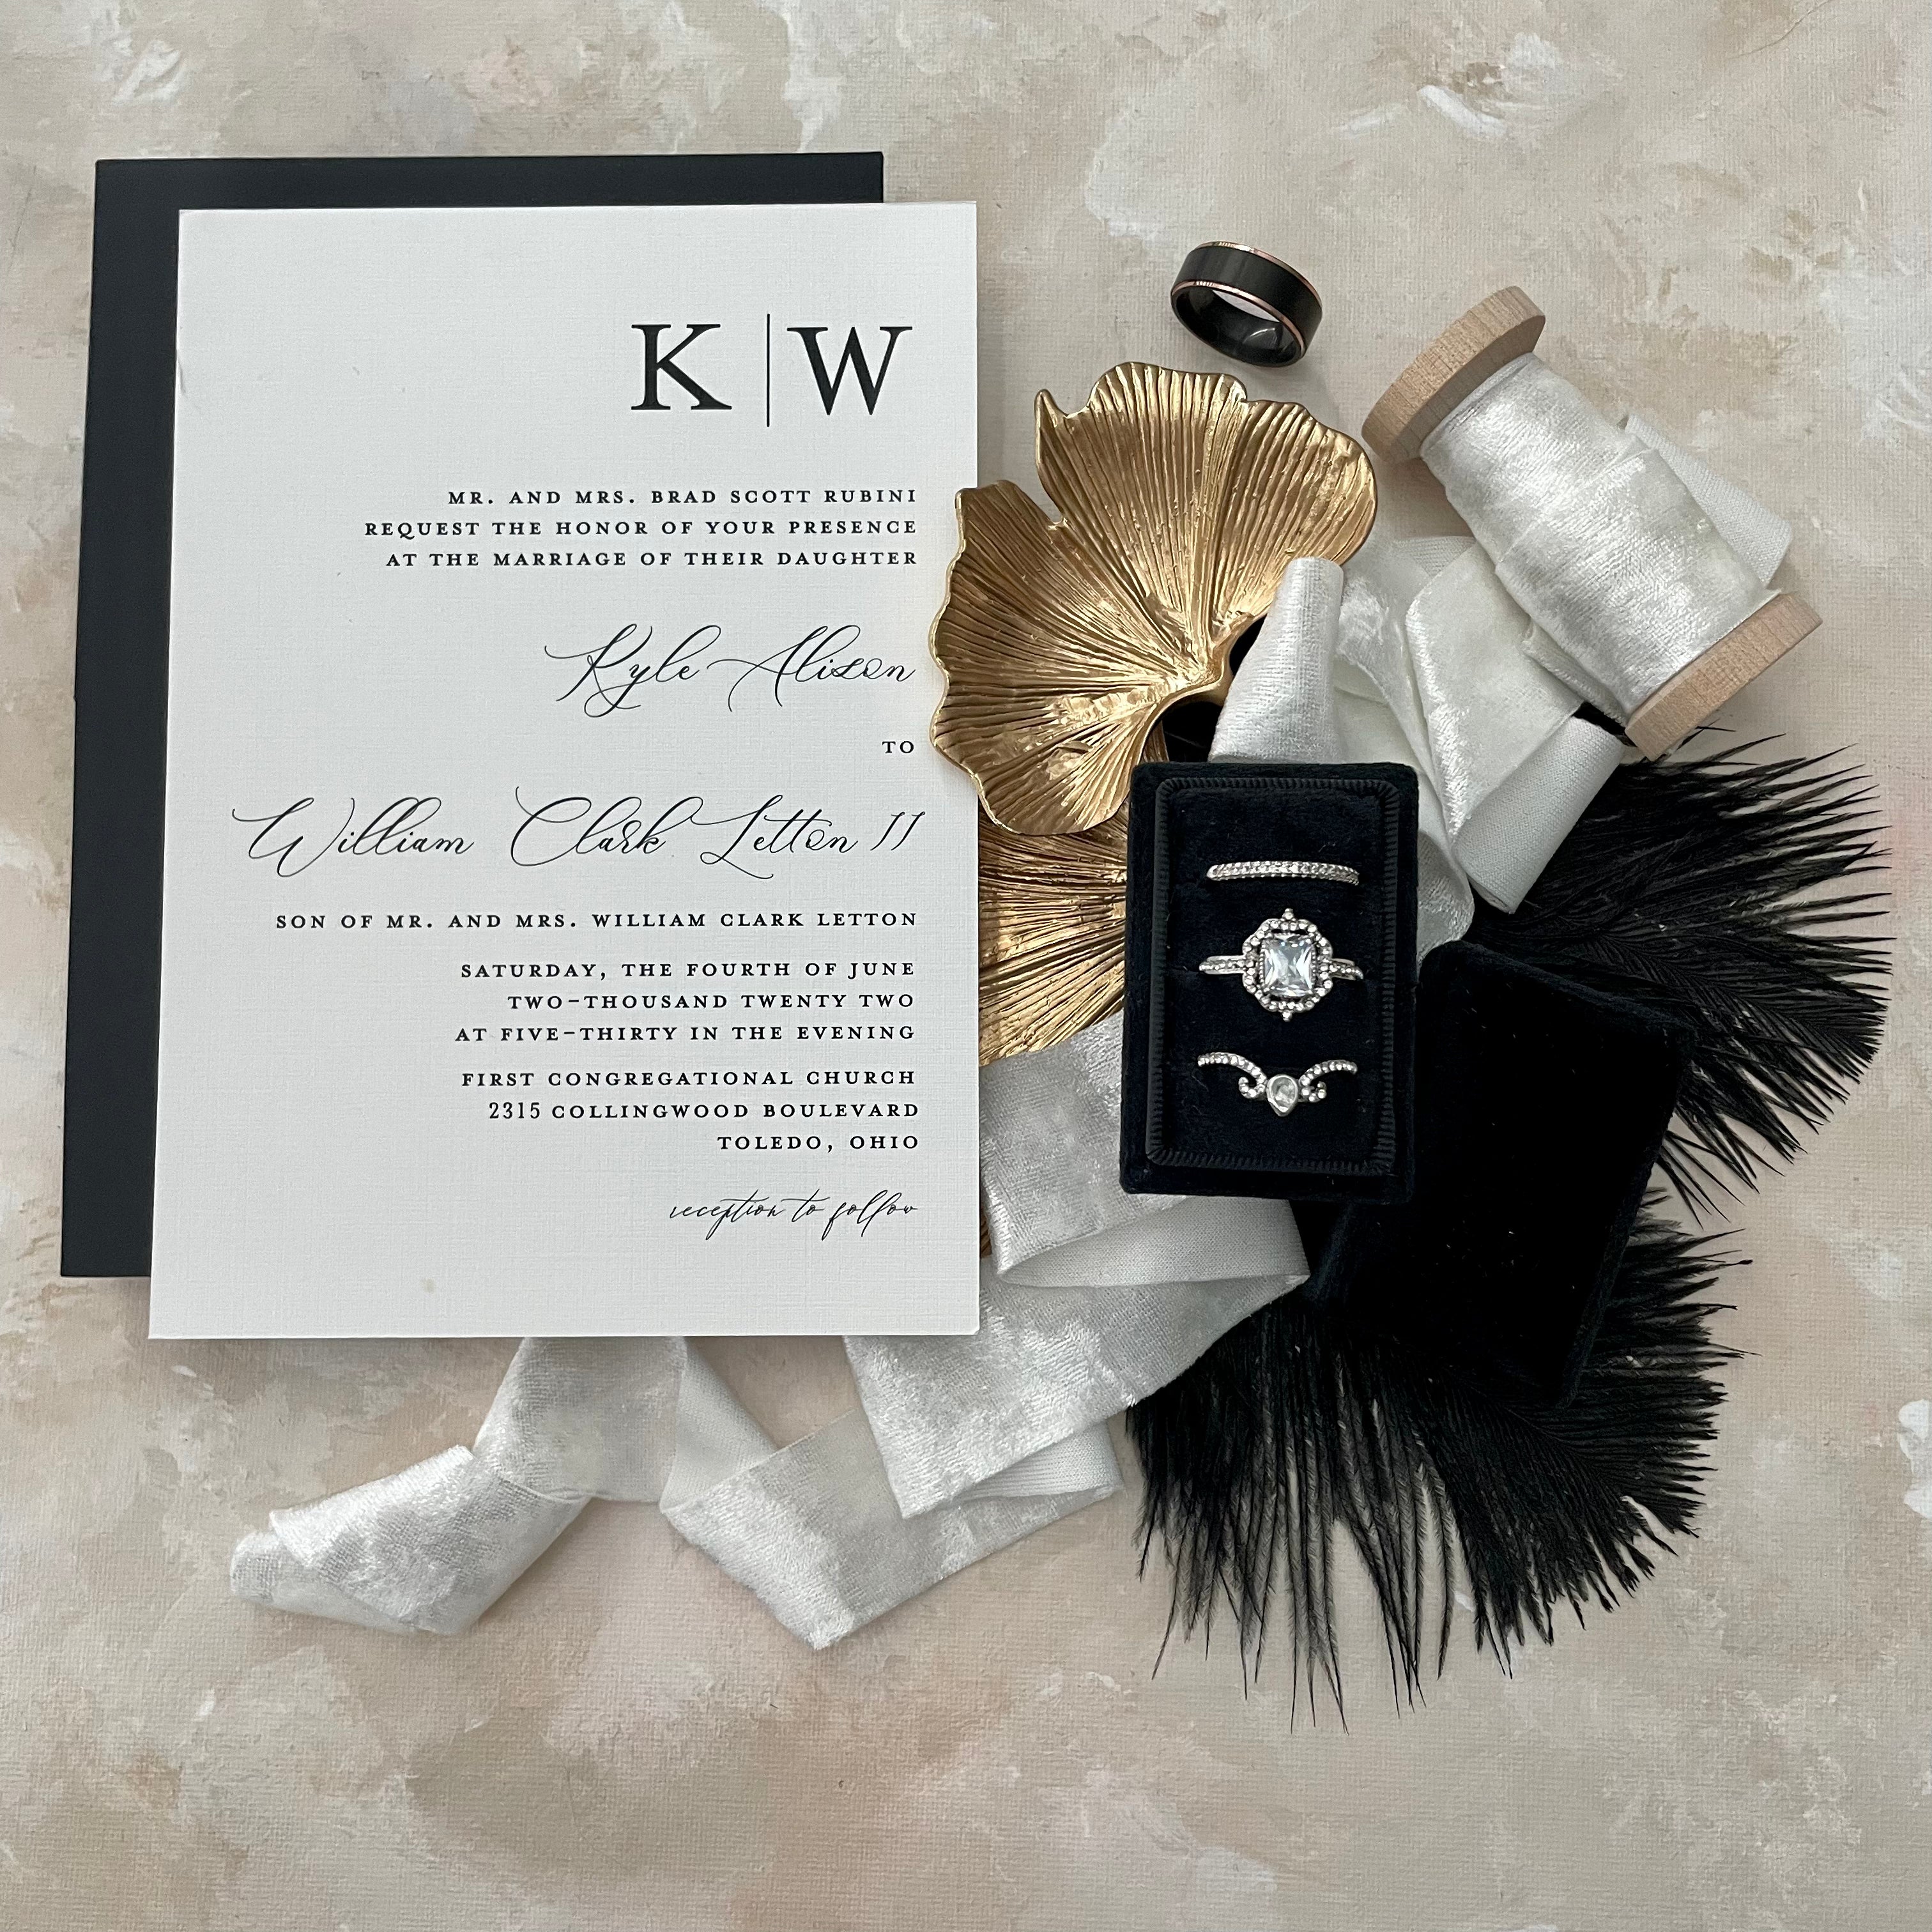 Black triple ring box styled with silver ribbon, Ginkgo Leaf Gold Styling Tray, black and white wedding invitation and black feathers - Flat Lay Props from Champagne & GRIT